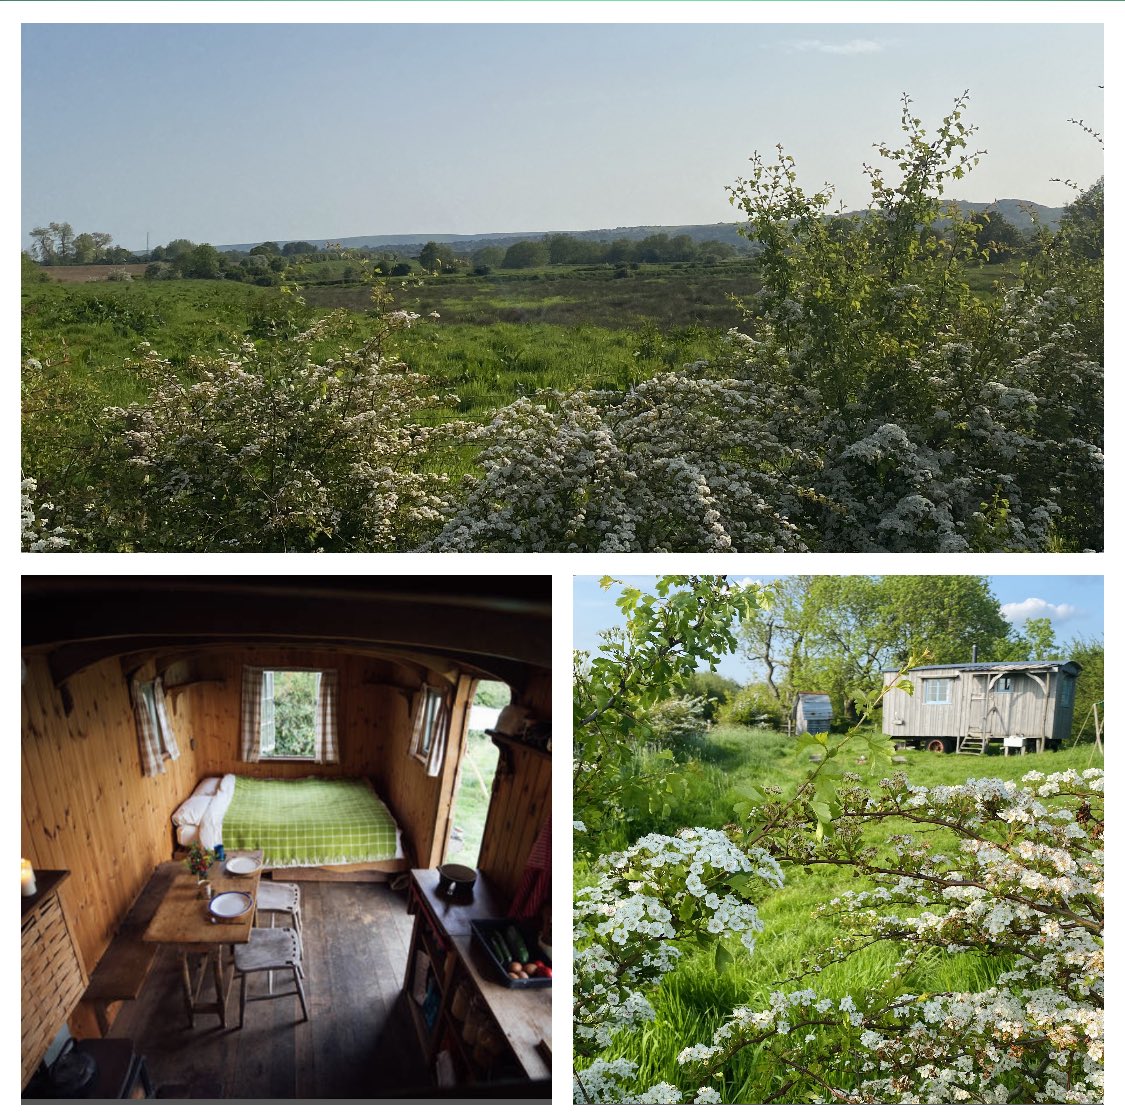 #glamping at the wagon. What we cant offer, hot tub, electricity, What we can offer, views, peace and tranquility, privacy, relaxation, #nature #cuckoo, skylark, swans, #swallows, #buzzards #kingfisher plus 20 other species. #birdwatching #holiday #shepardshut